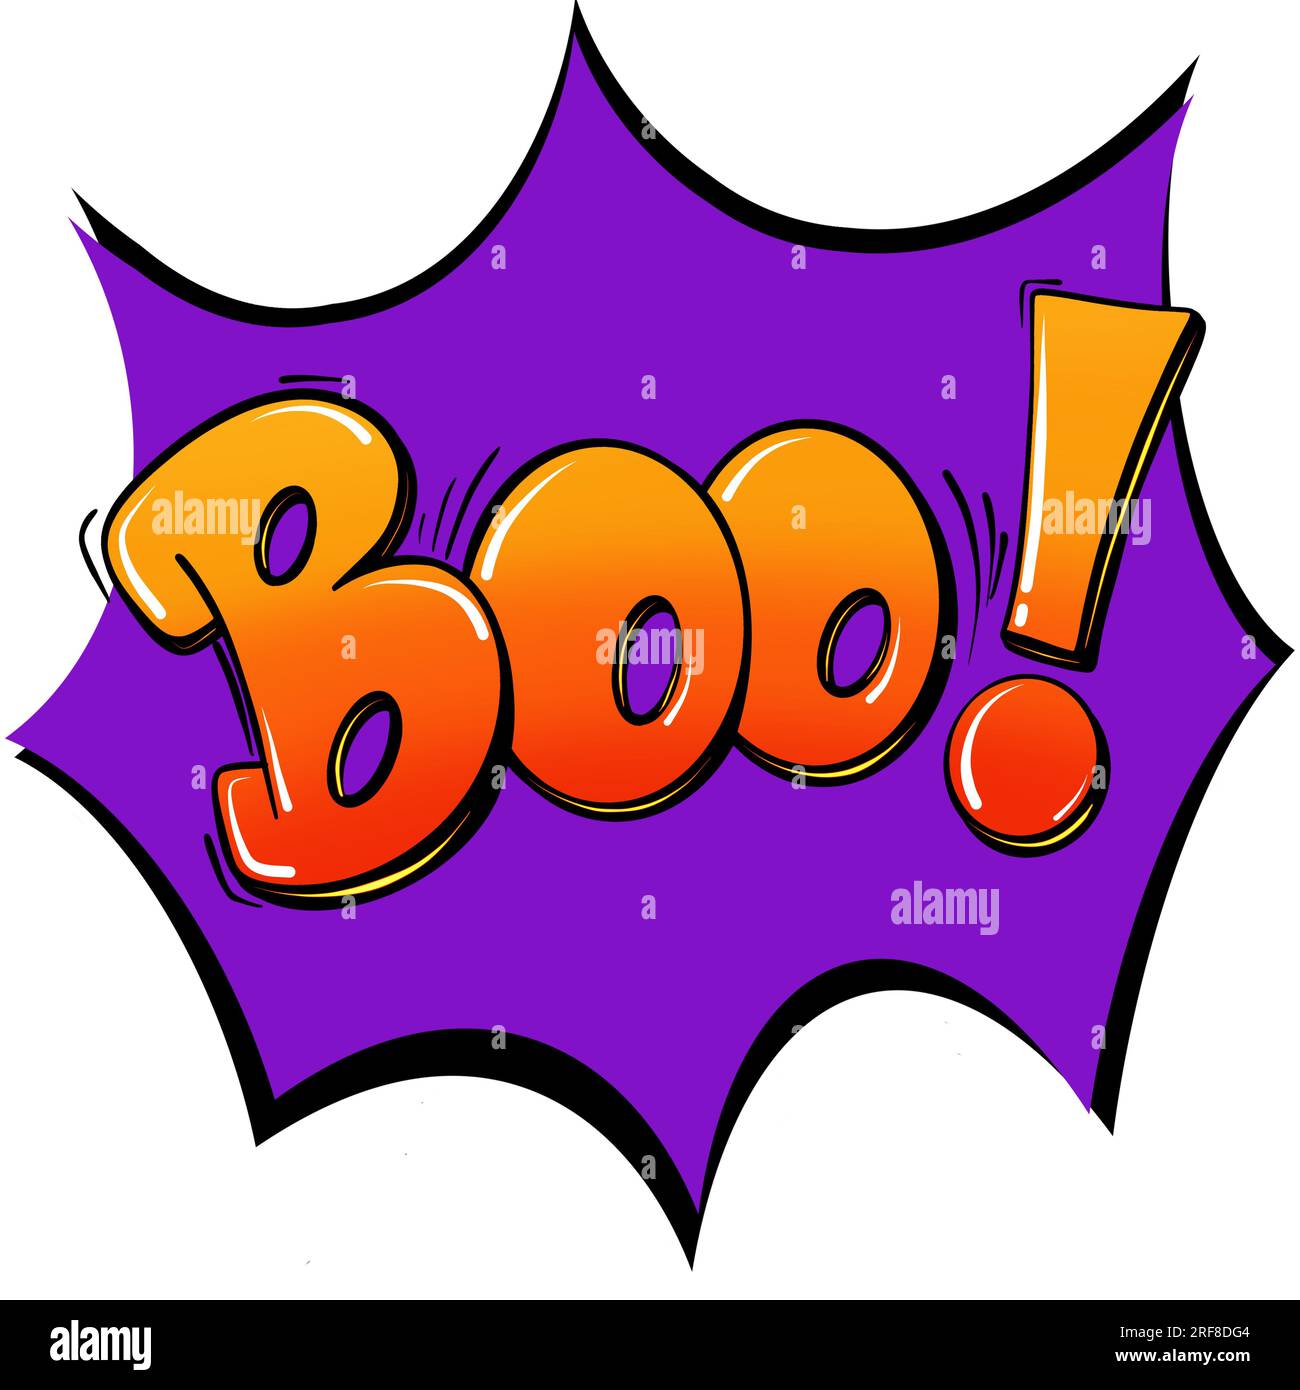 Halloween clip art illustration with the word Boo in yellow orange ...